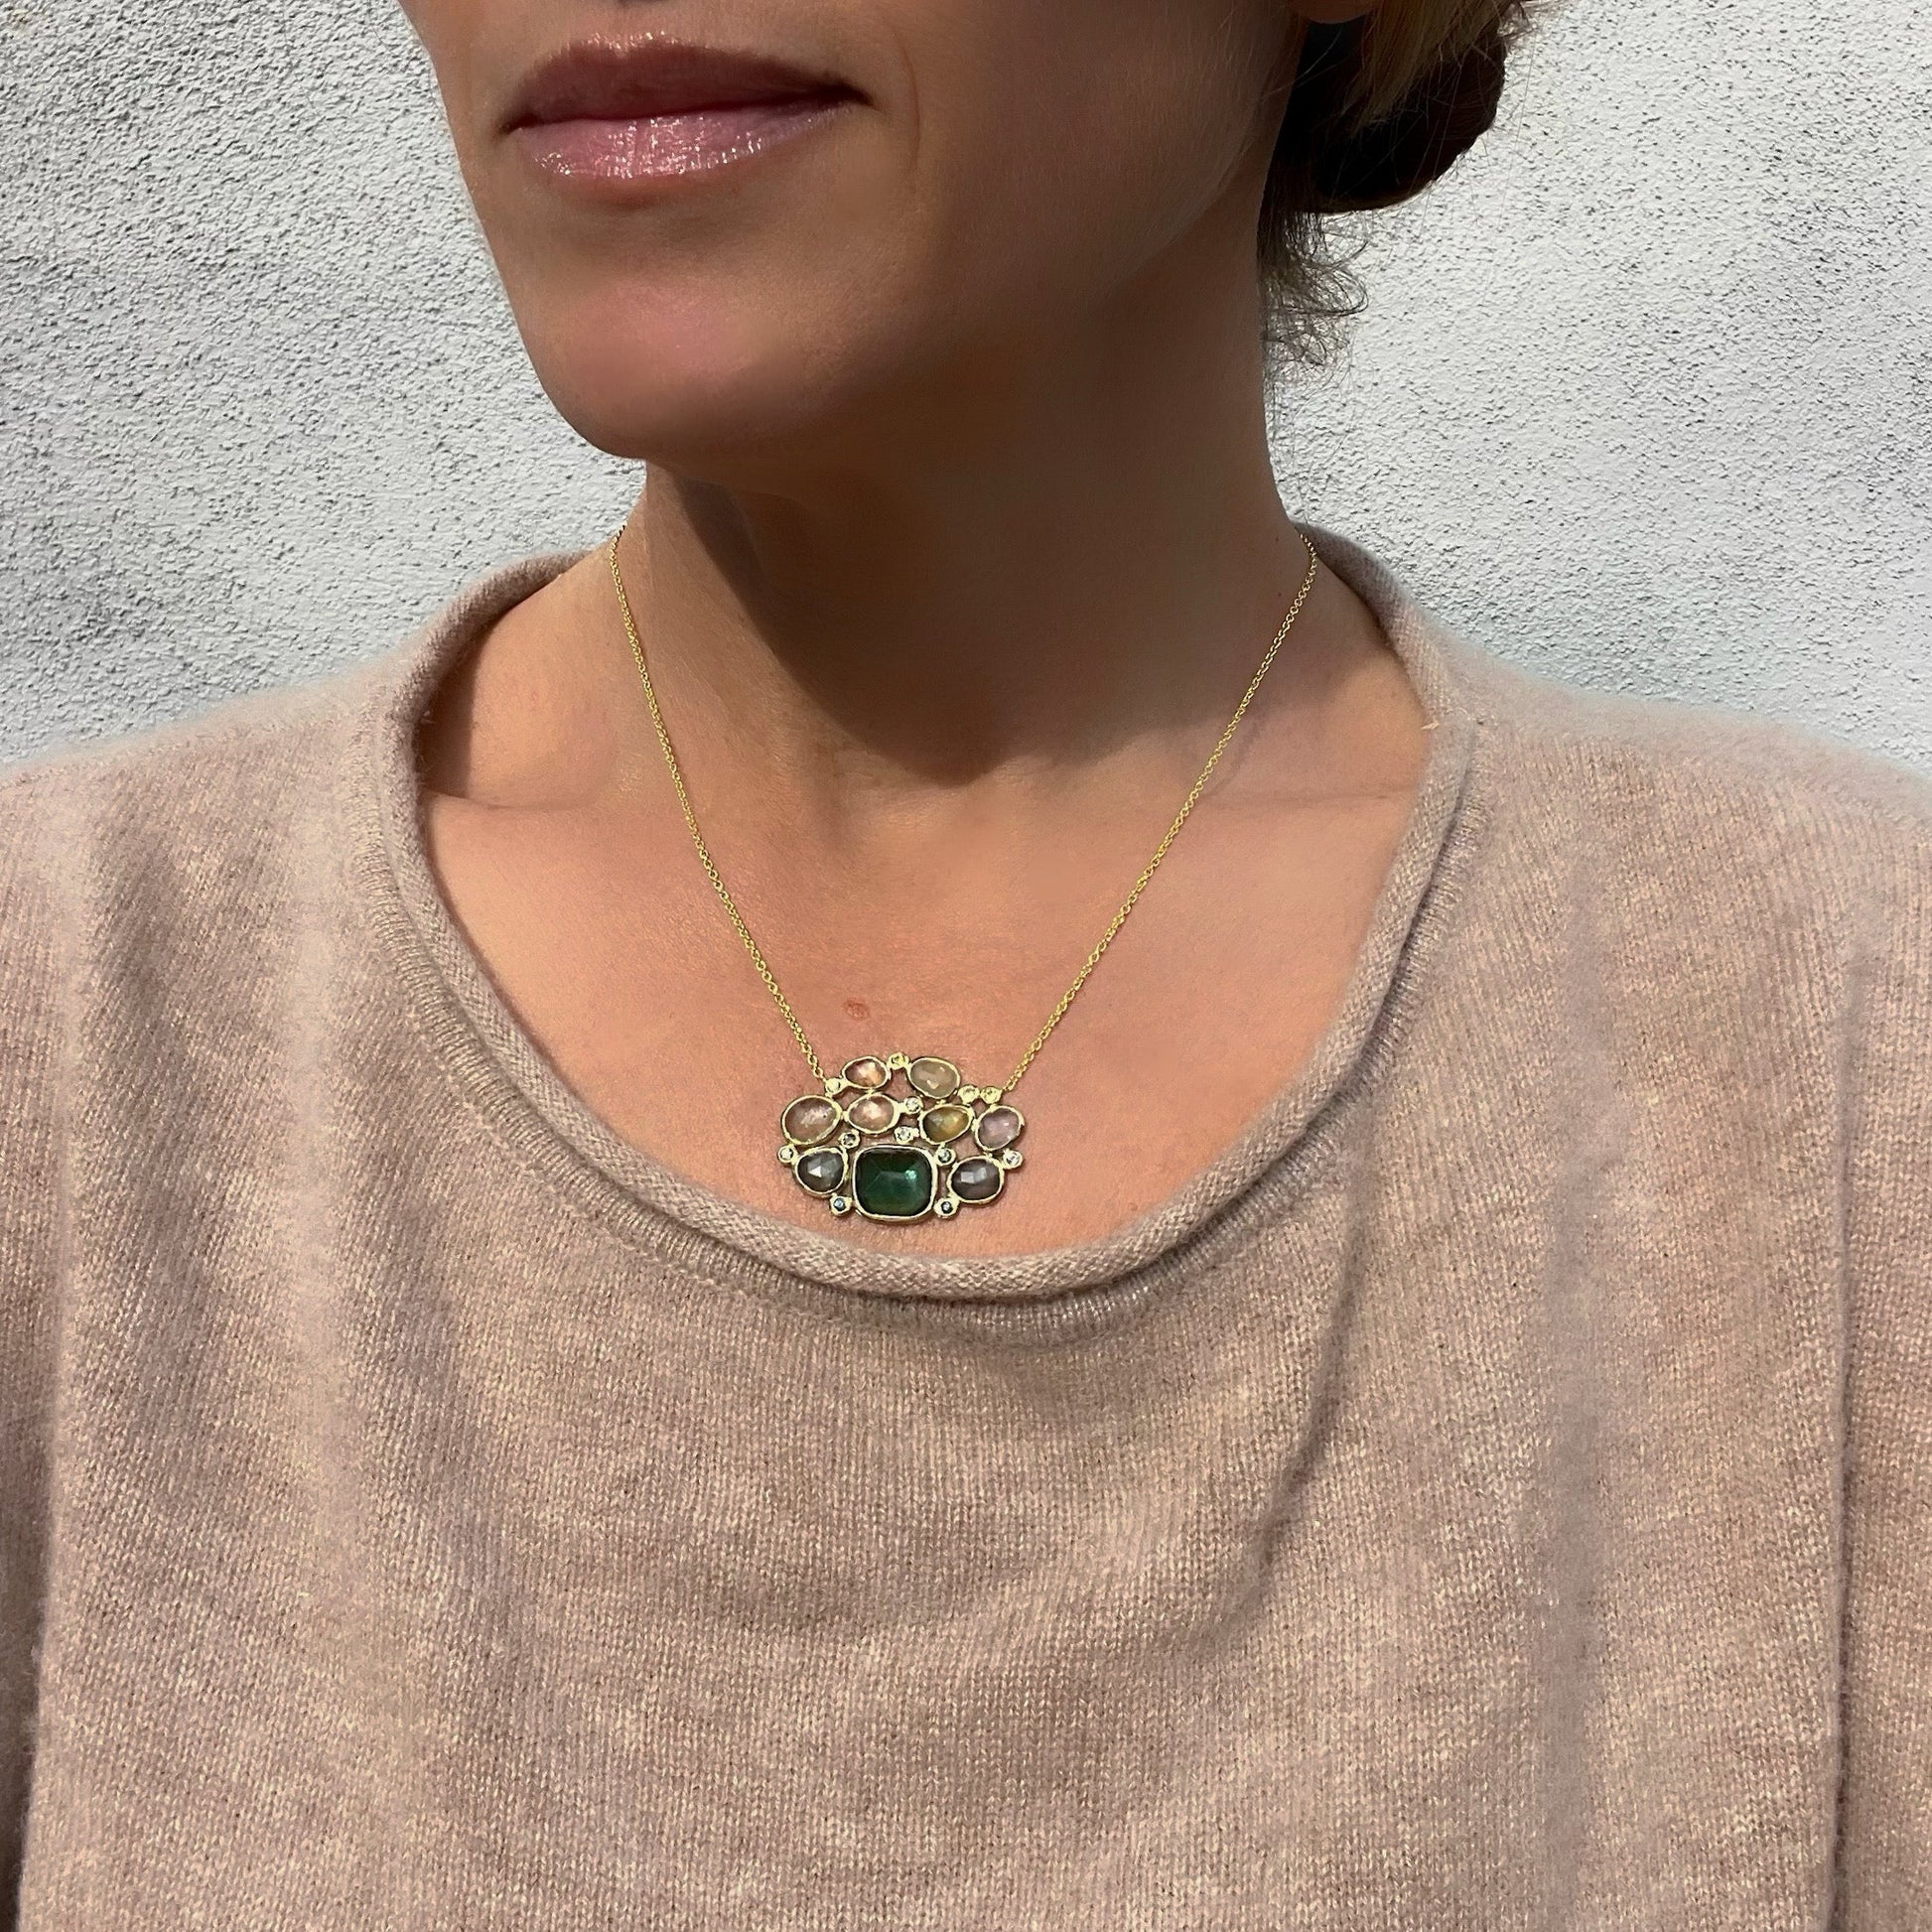  Model wearing a Tourmaline and Sapphire Necklace by NIXIN Jewelry with green gemstones set in 14k gold.